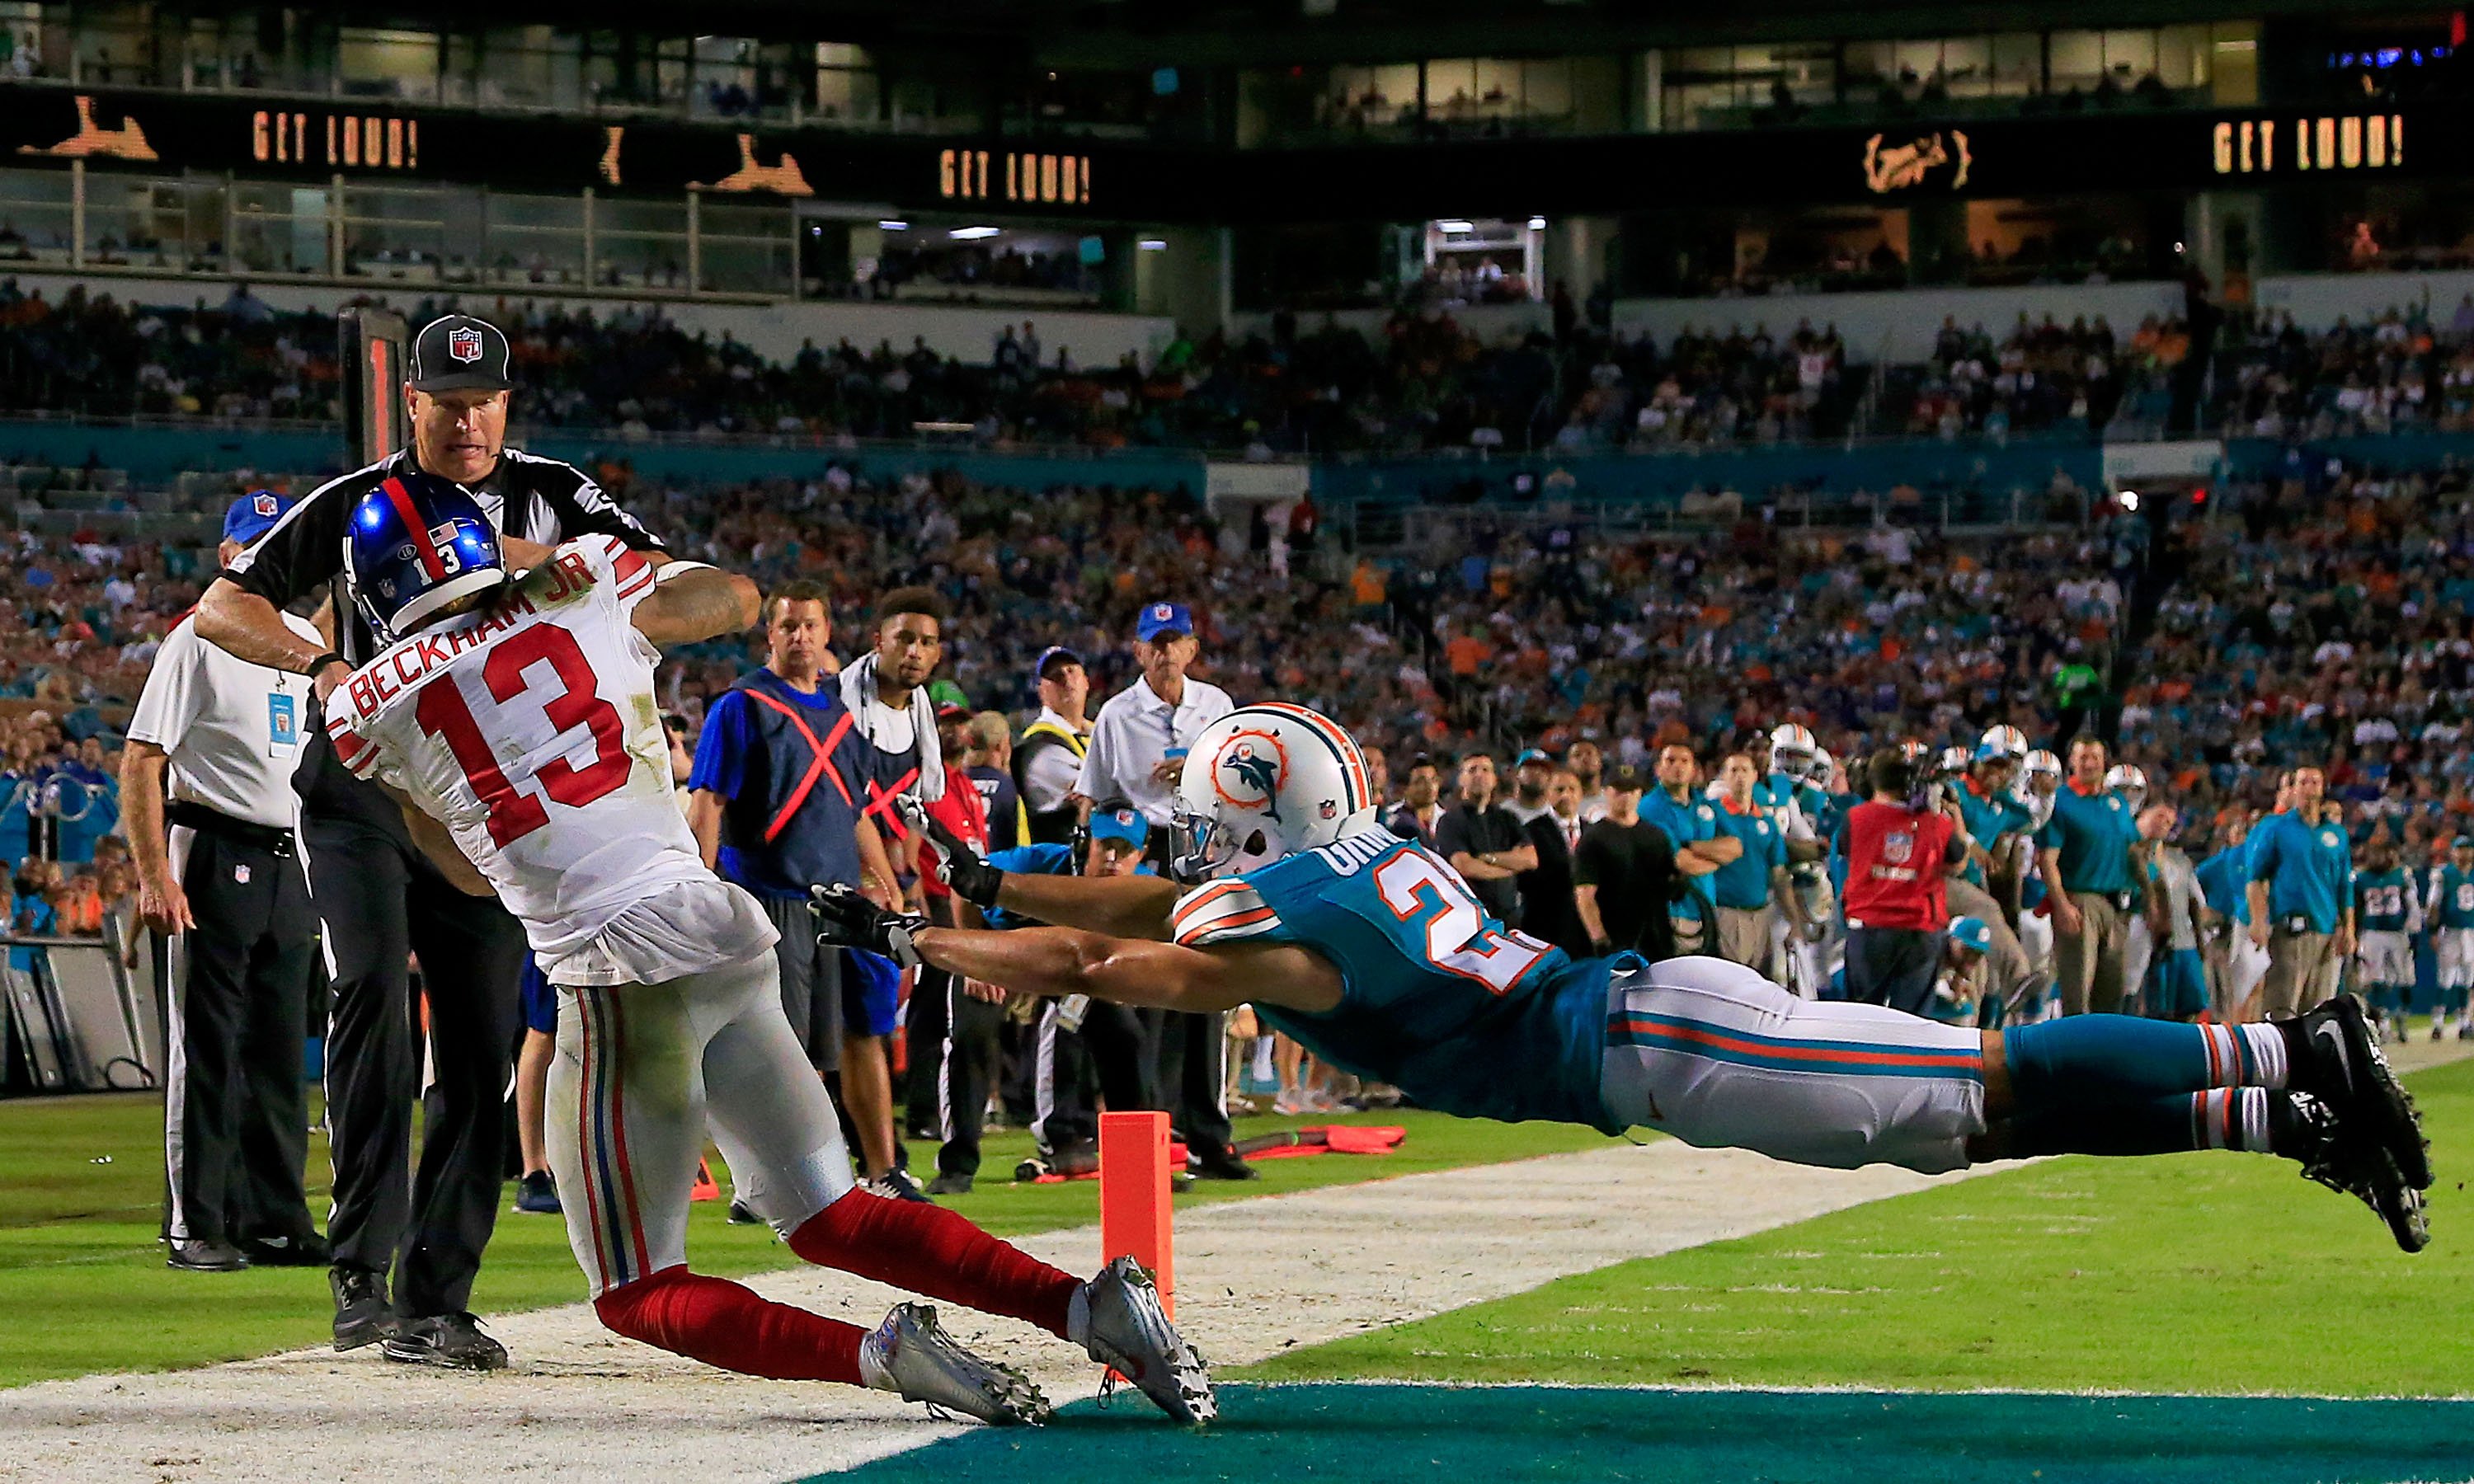 Odell Beckham #13 of the New York Giants catches a touchdown pass as Brent Grimes #21 of the Miami Dolphins defends during the third quarter of the game at Sun Life Stadium on Dec. 14, 2015 in Miami Gardens, Florida. (Chris Trotman—Getty Images)